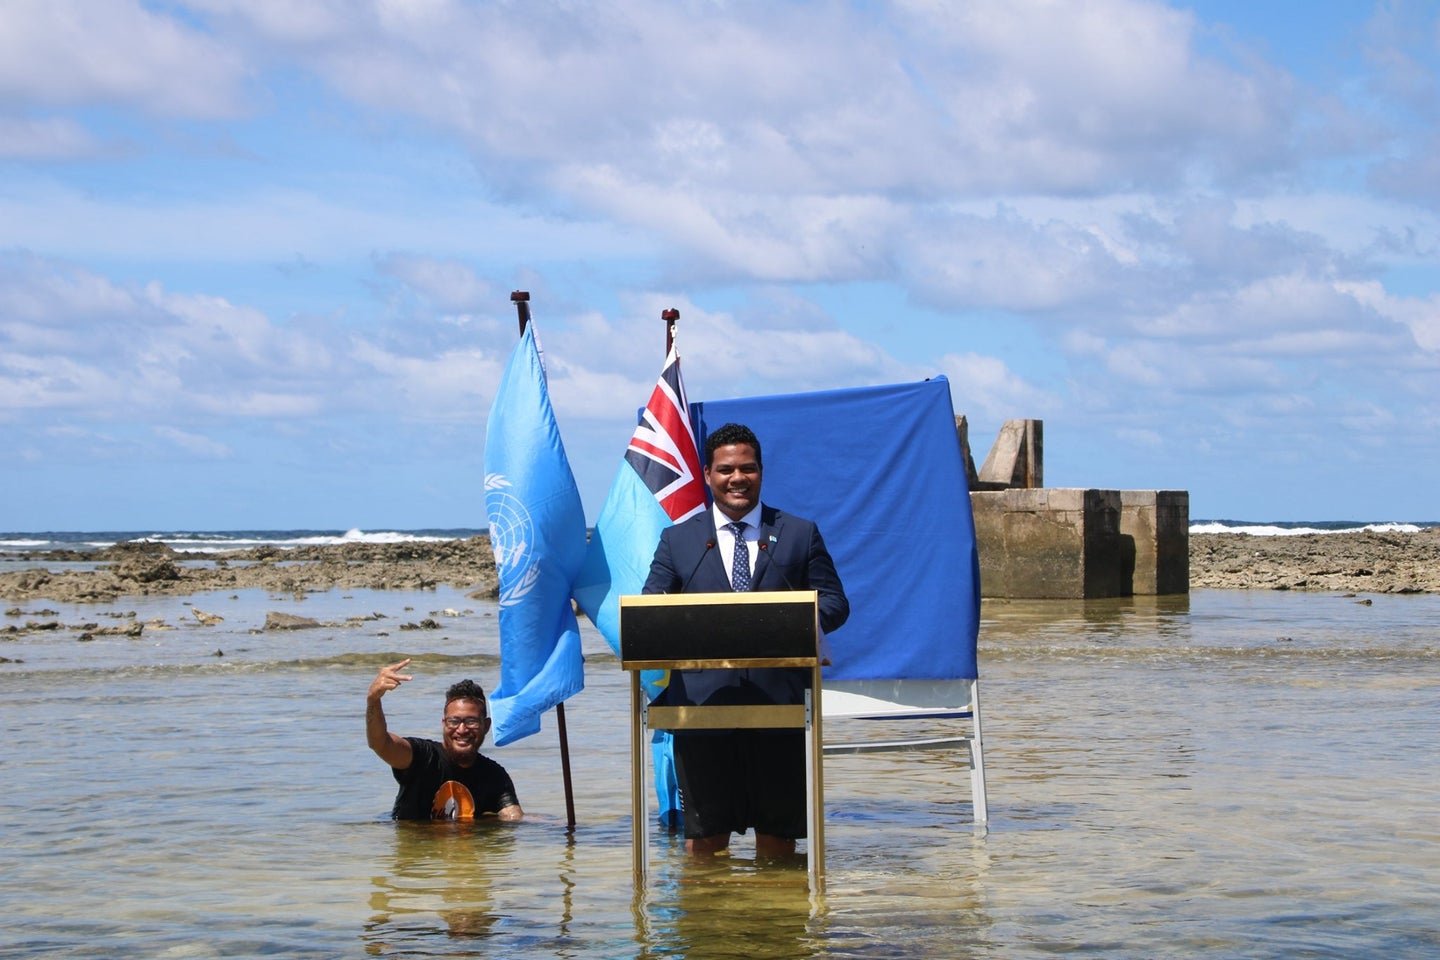 Tuvalu minister Simon Kofe records his COP26 speech in a suit and at a lectern while standing with his flags in the Pacific Ocean